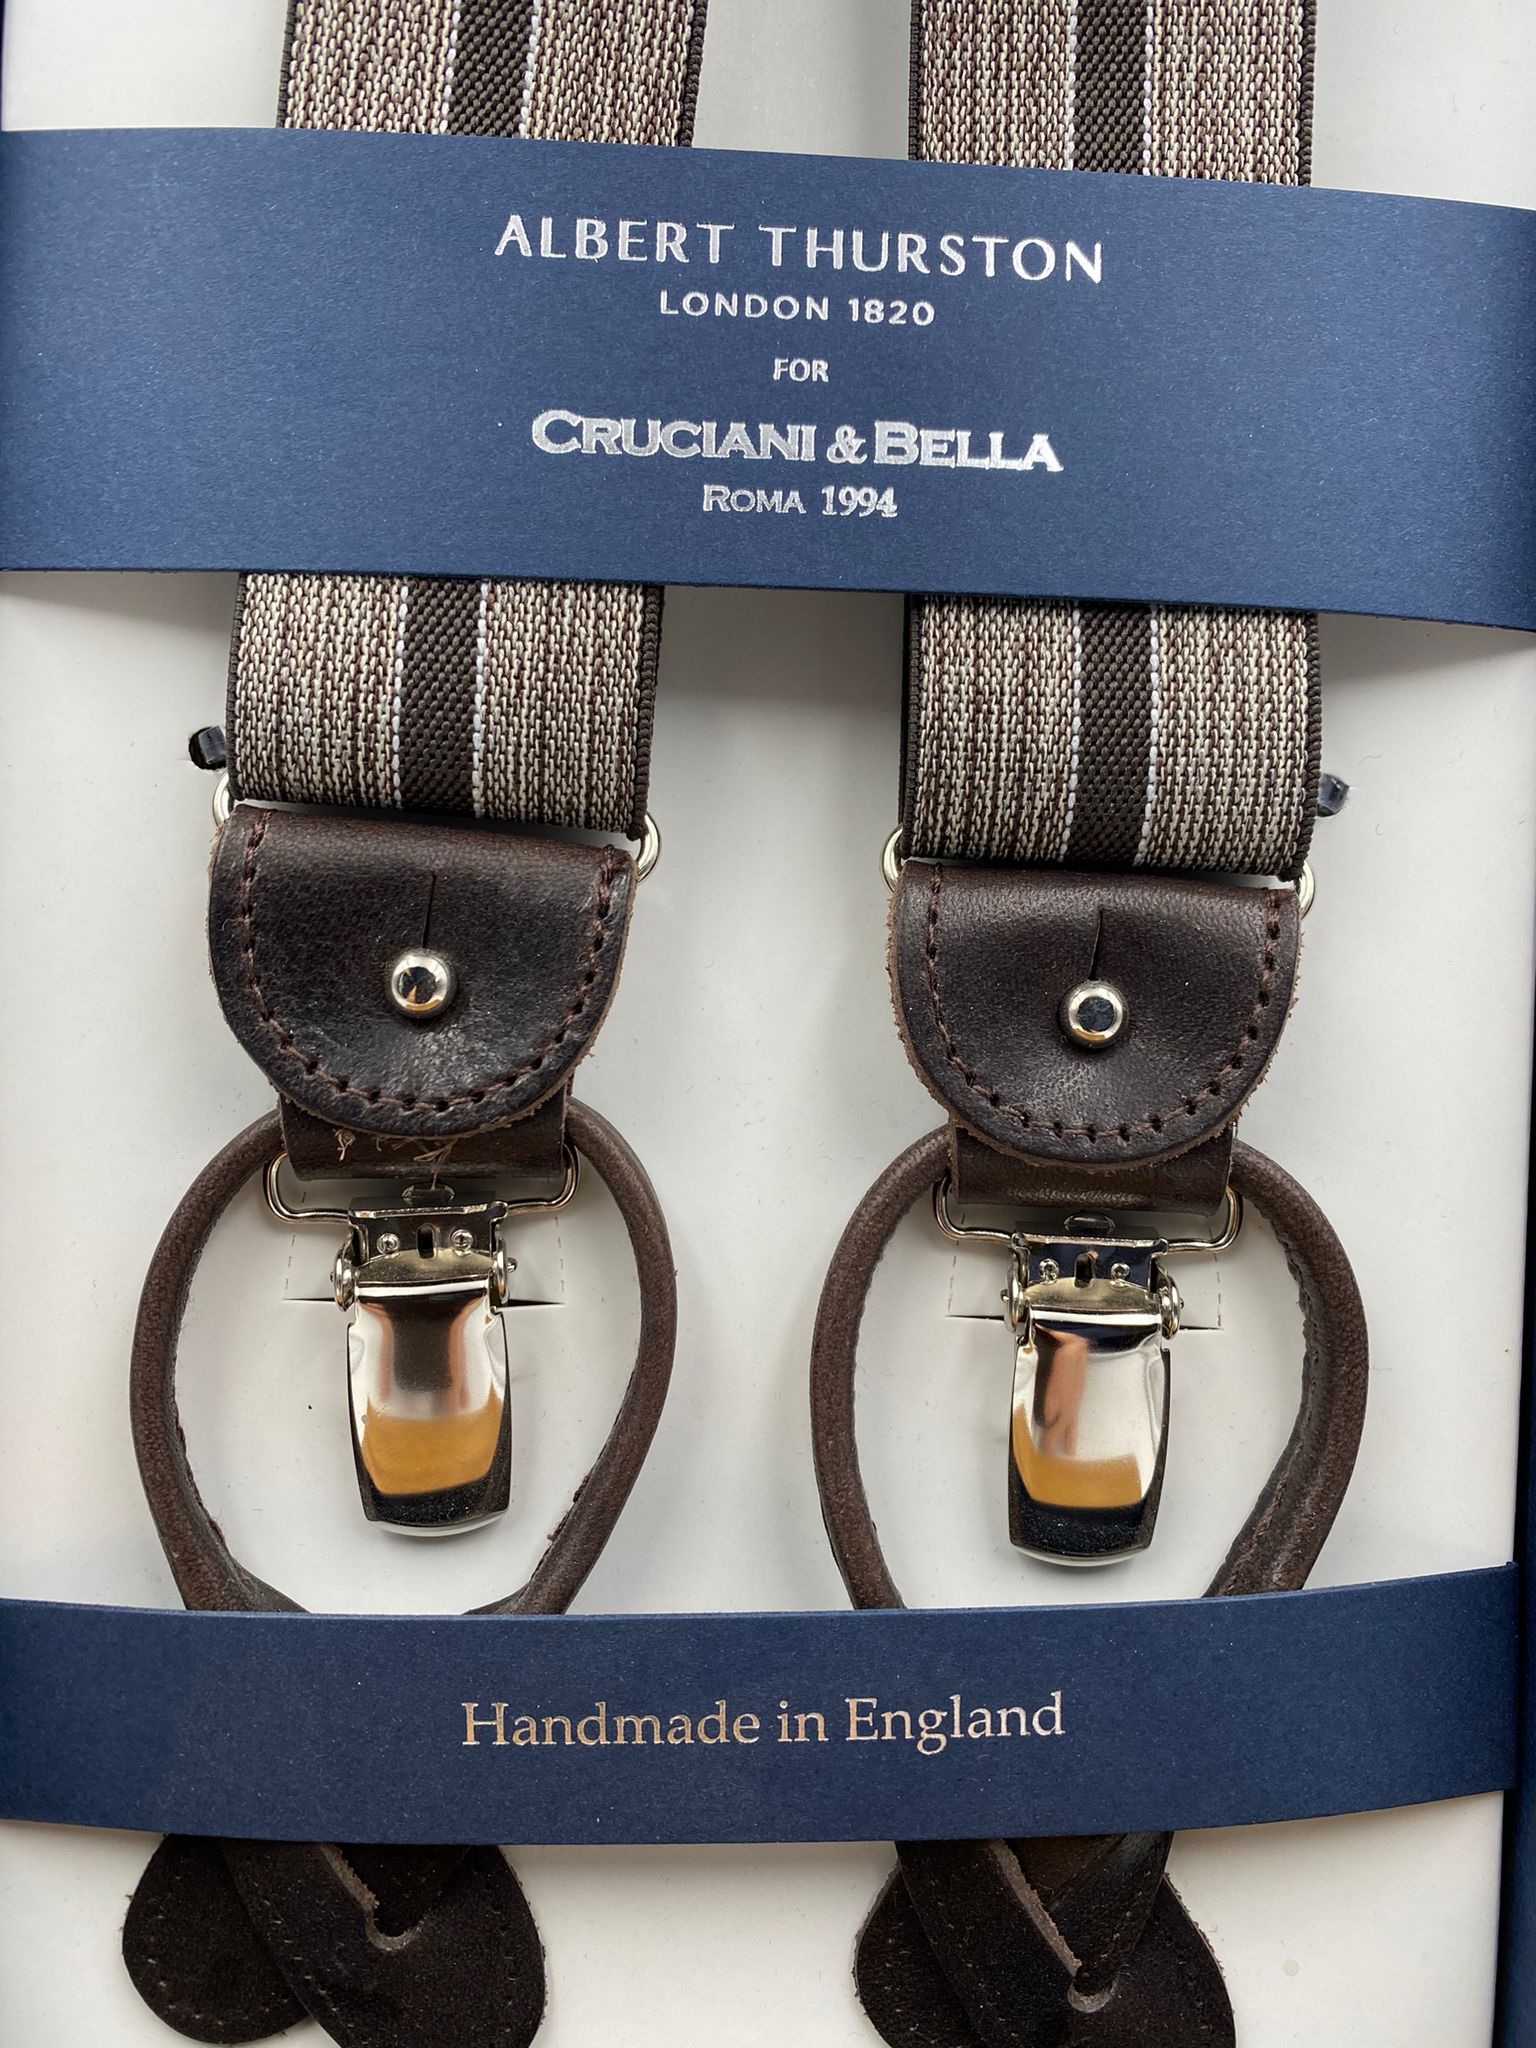 Albert Thurston for Cruciani & Bella Made in England 2 in 1 Adjustable Sizing 35 mm elastic braces Brown Stripes Y-Shaped Nickel Fittings #4877